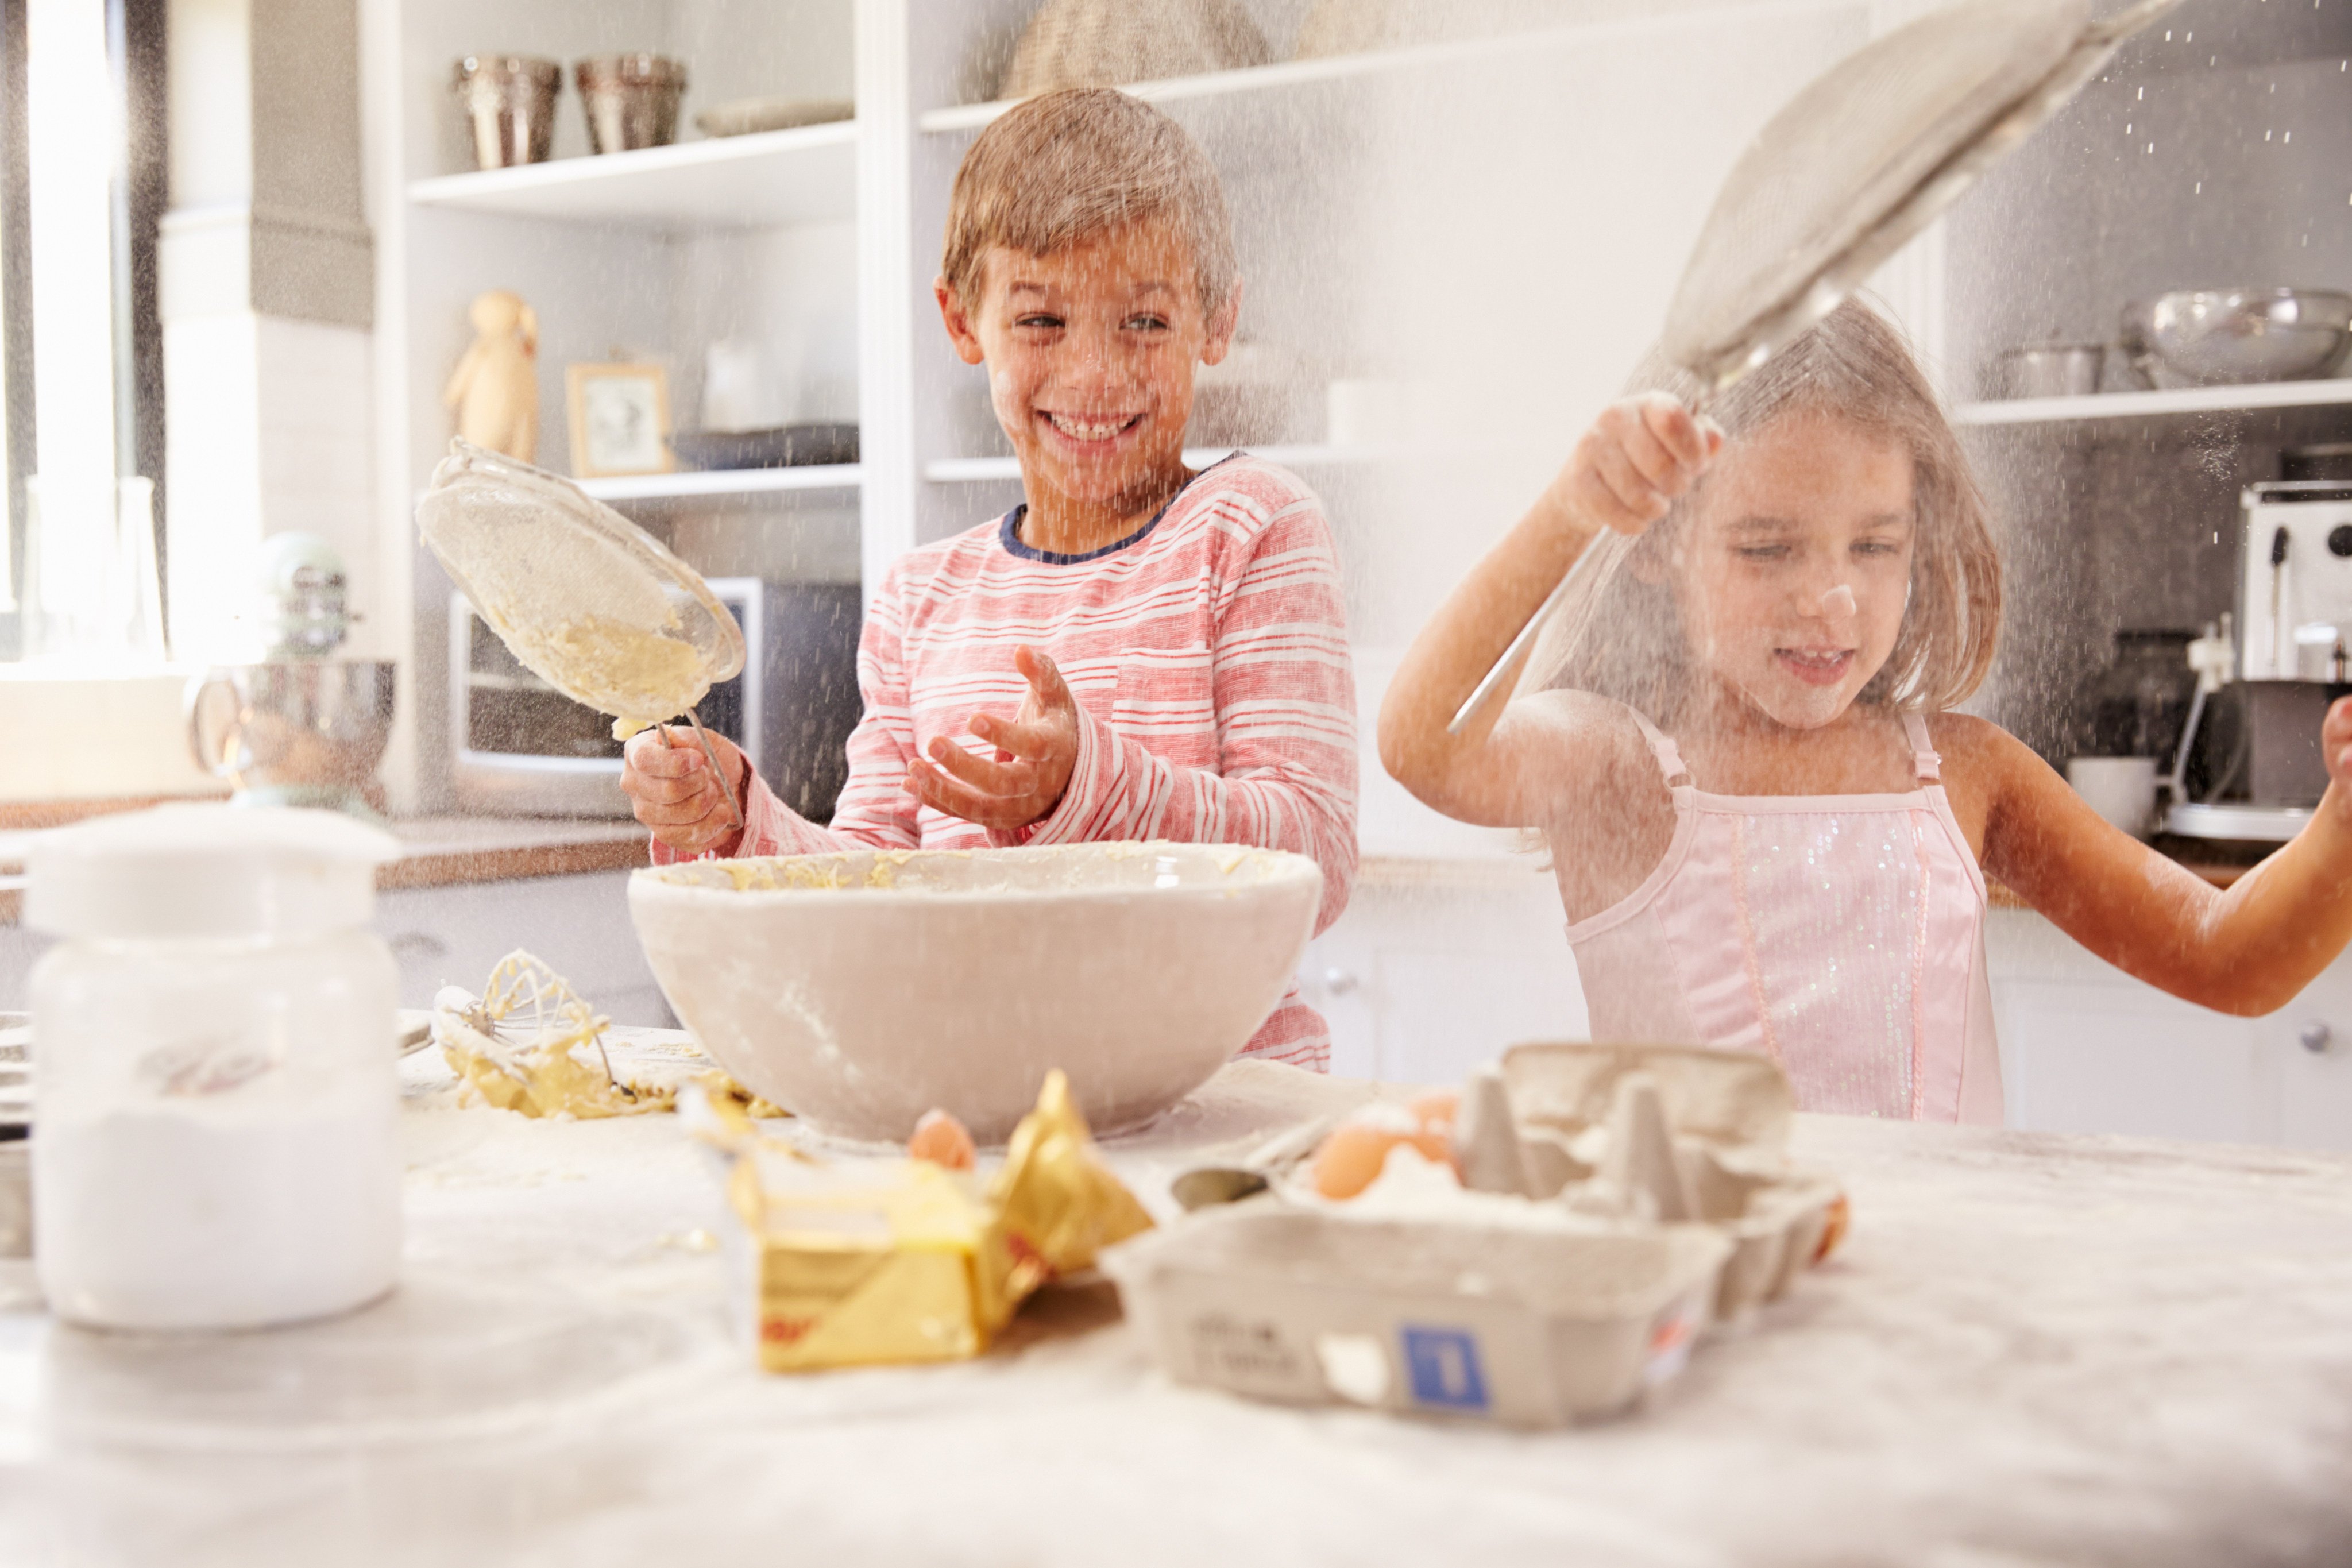 Baking with your children sounds like an educational entertaining thing to do, but beware, it can be a recipe for disaster. Photo: Shutterstock 